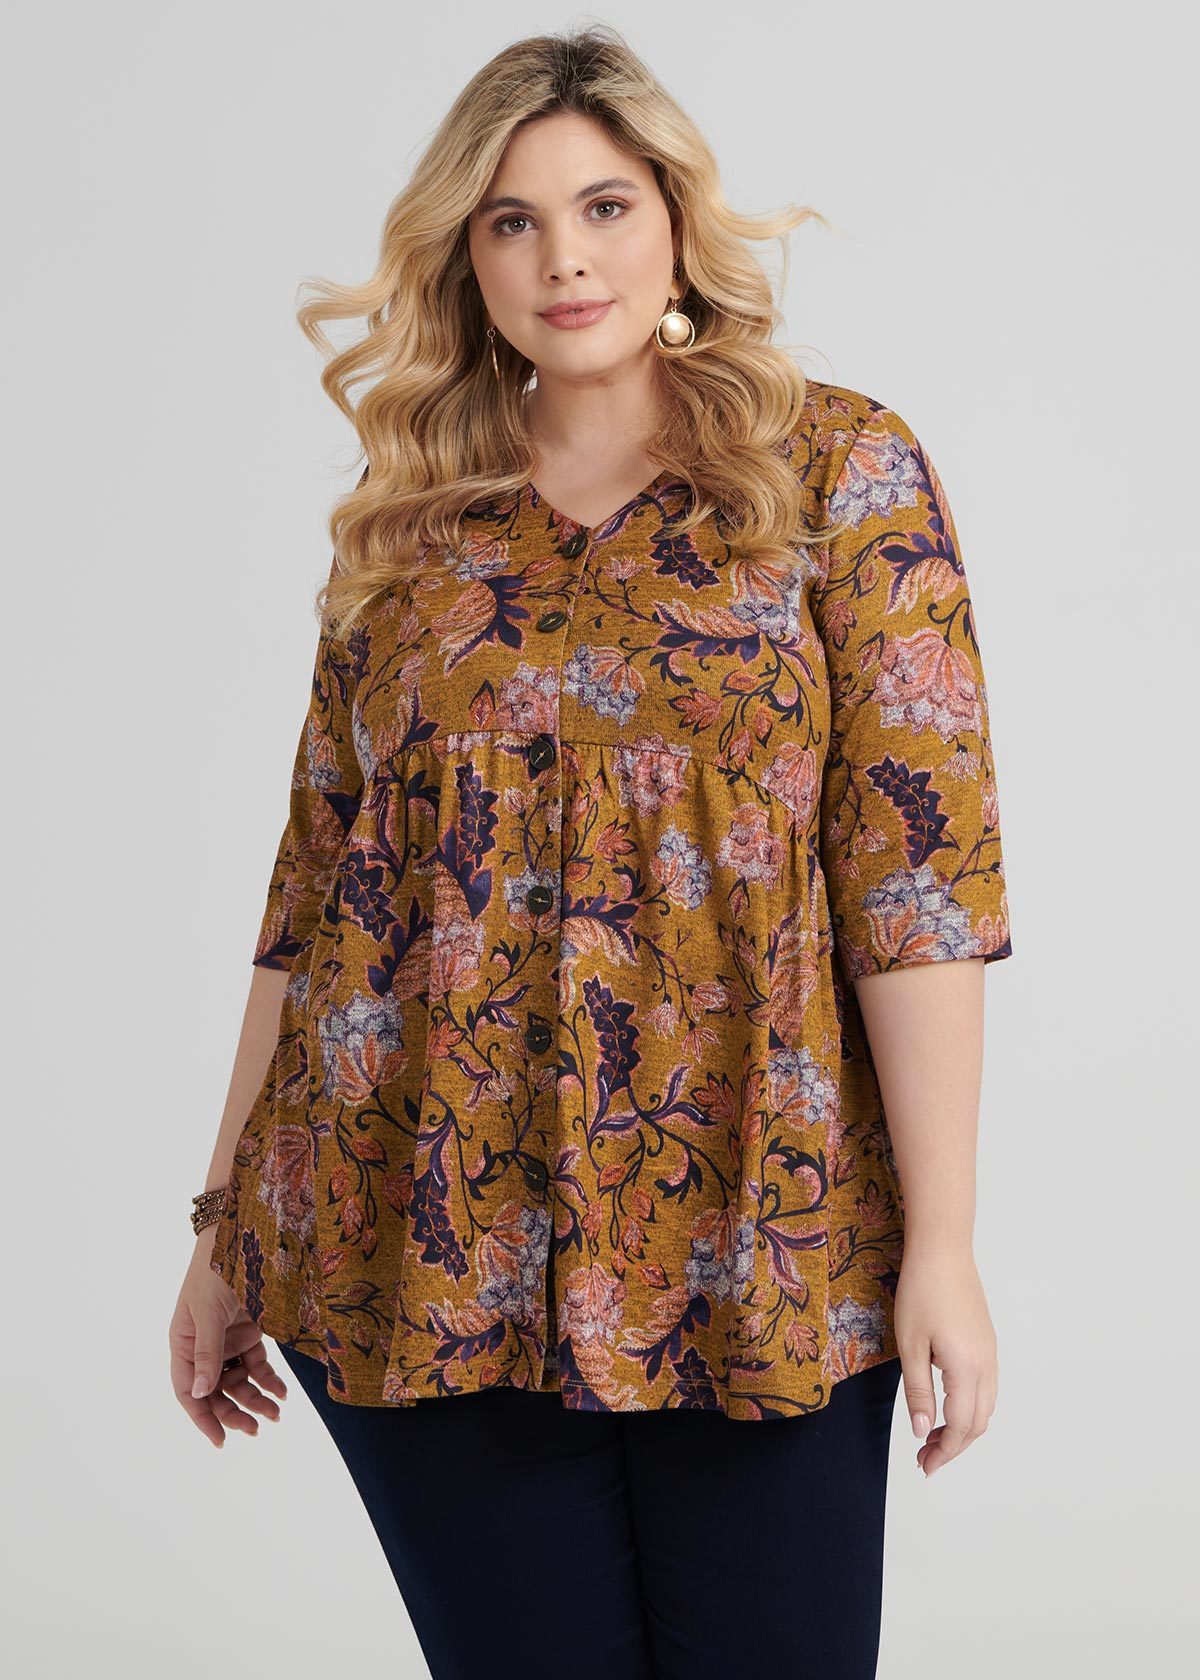 Shop Ethnic Floral Top in Print, Sizes 12-30 | Taking Shape AU